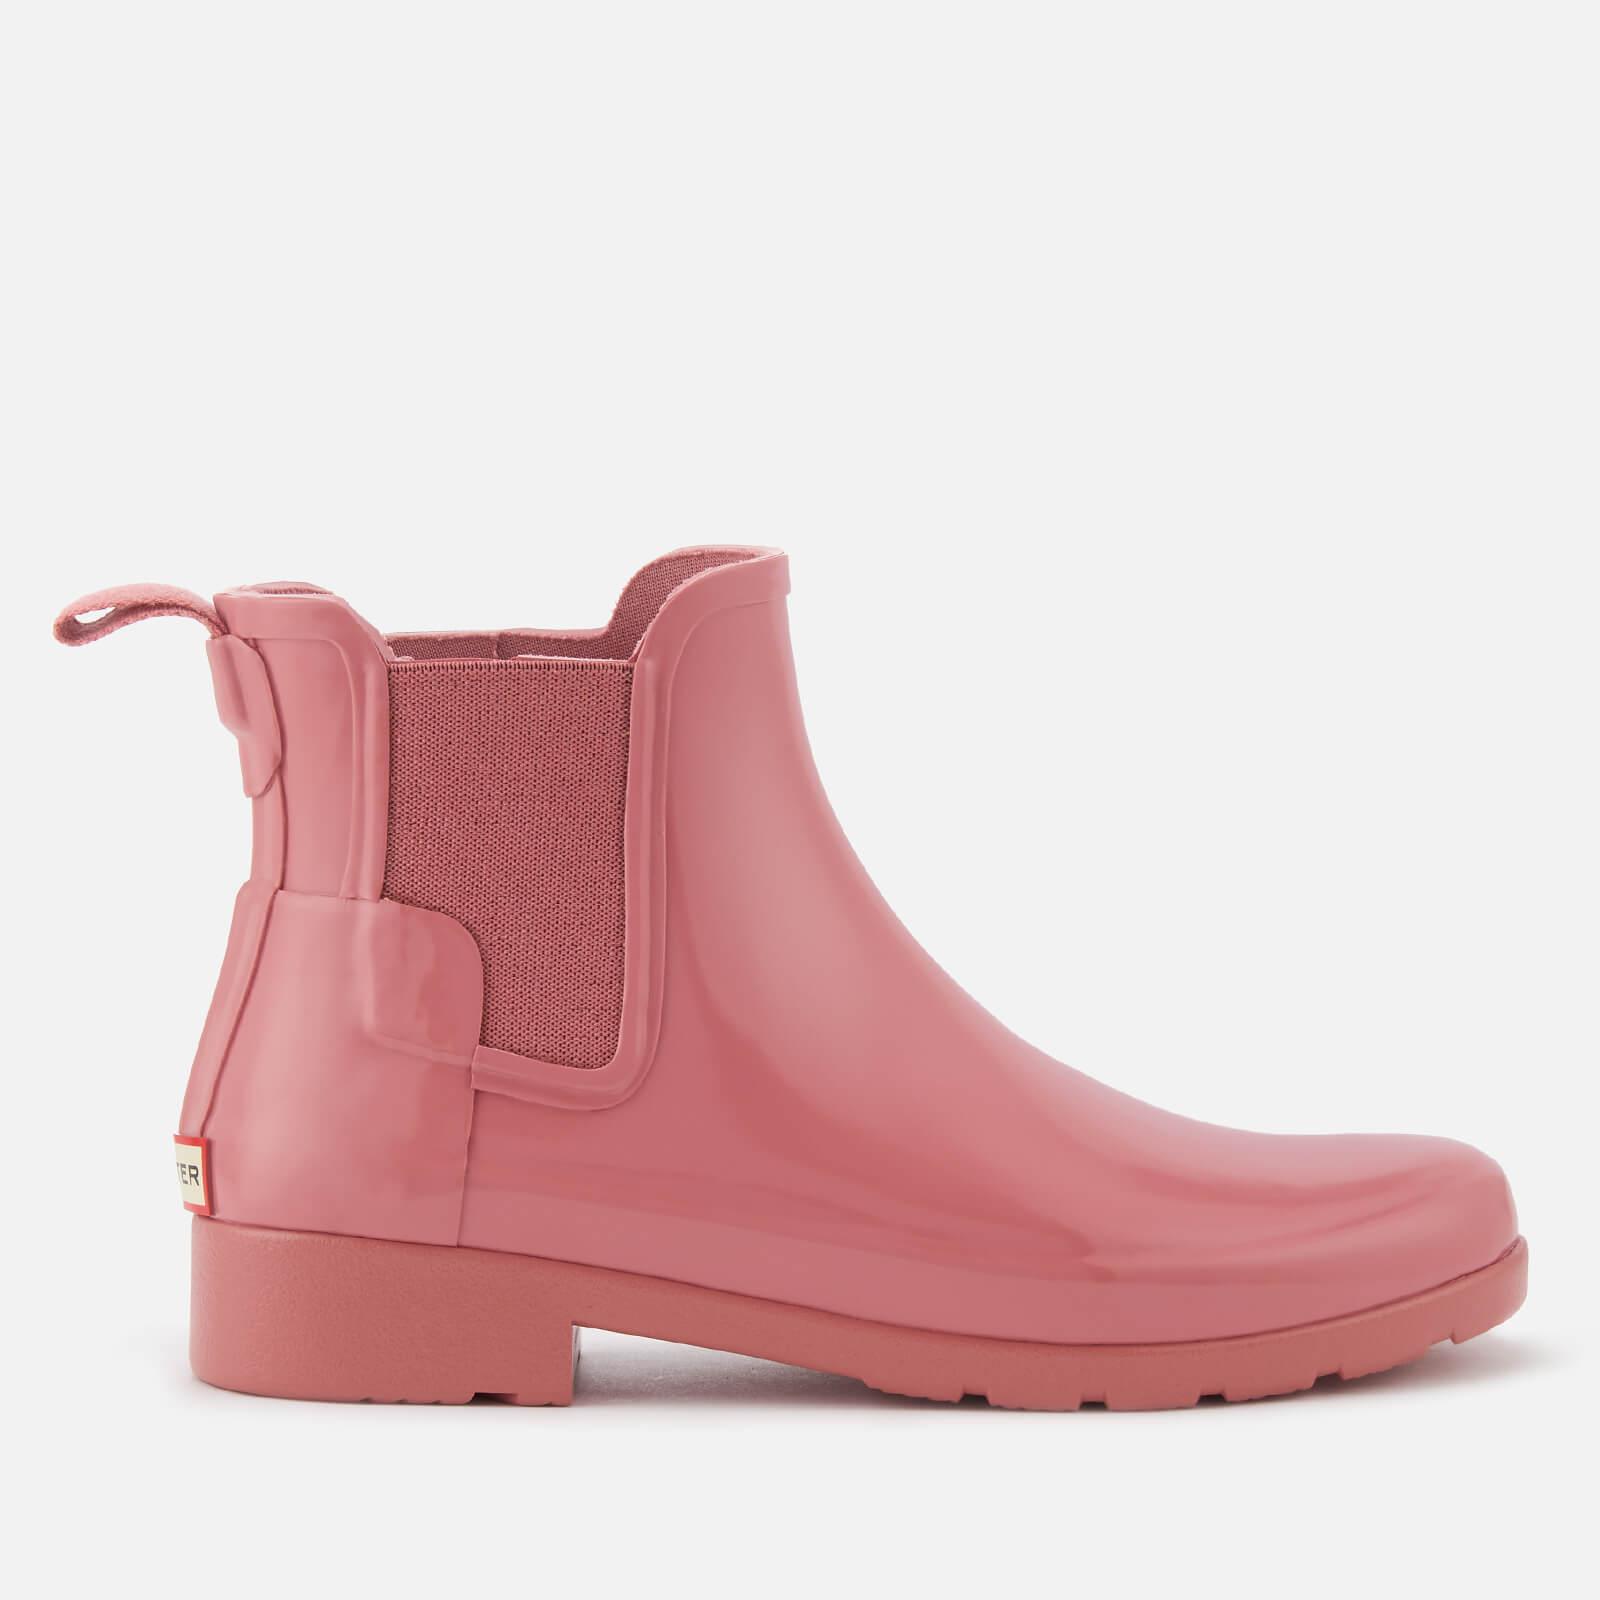 HUNTER Rubber Original Refined Gloss Chelsea Boots in Pink | Lyst